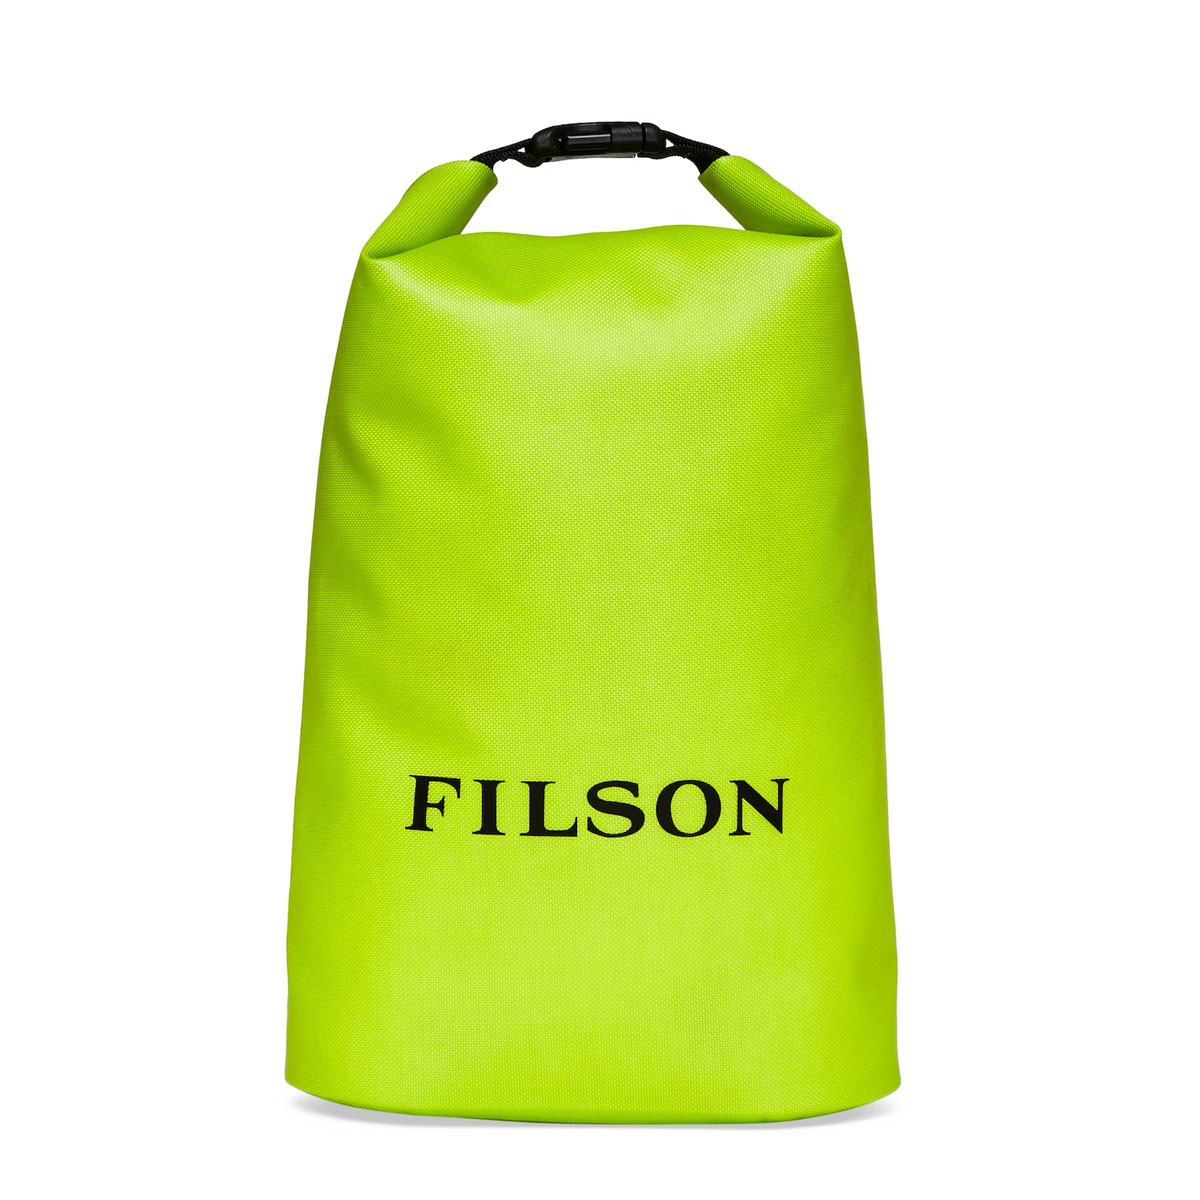 Filson Dry-Bag Small Laser Green, Water- and wear-resistant roll-top Dry bag